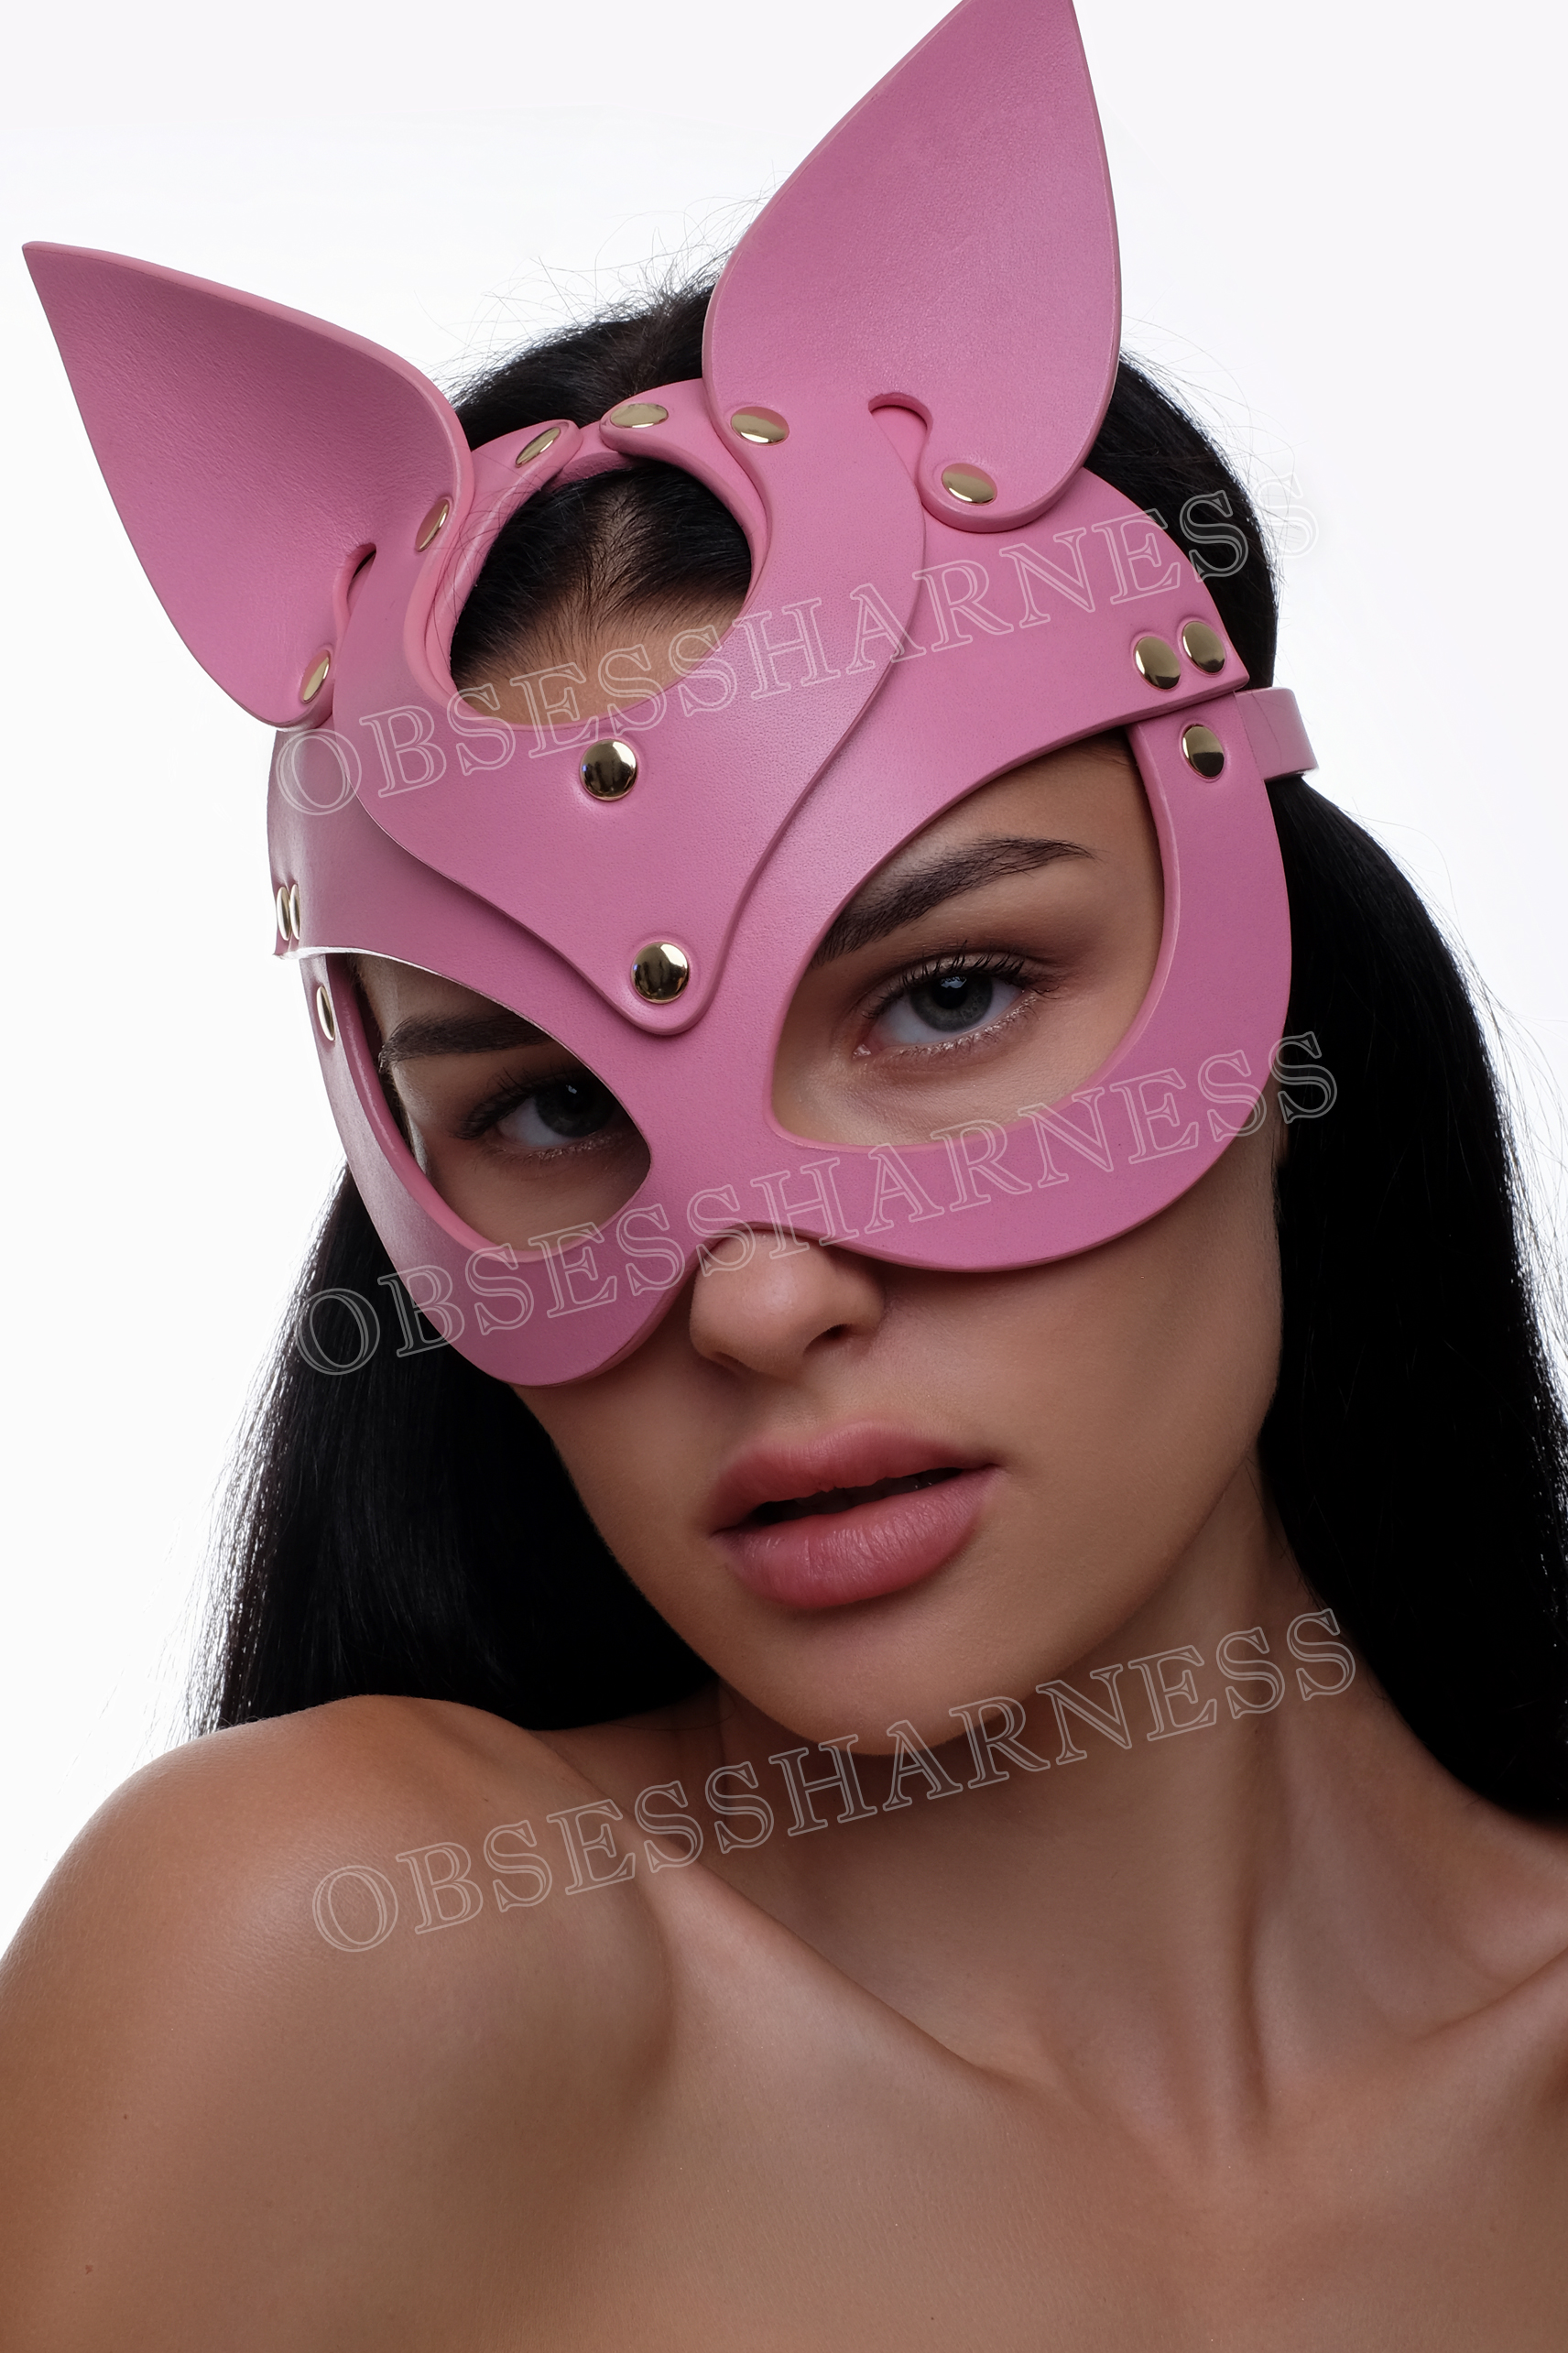 leather pink sexy cat mask for half the face and slits for the eyes, comfortable for role-playing BDSM